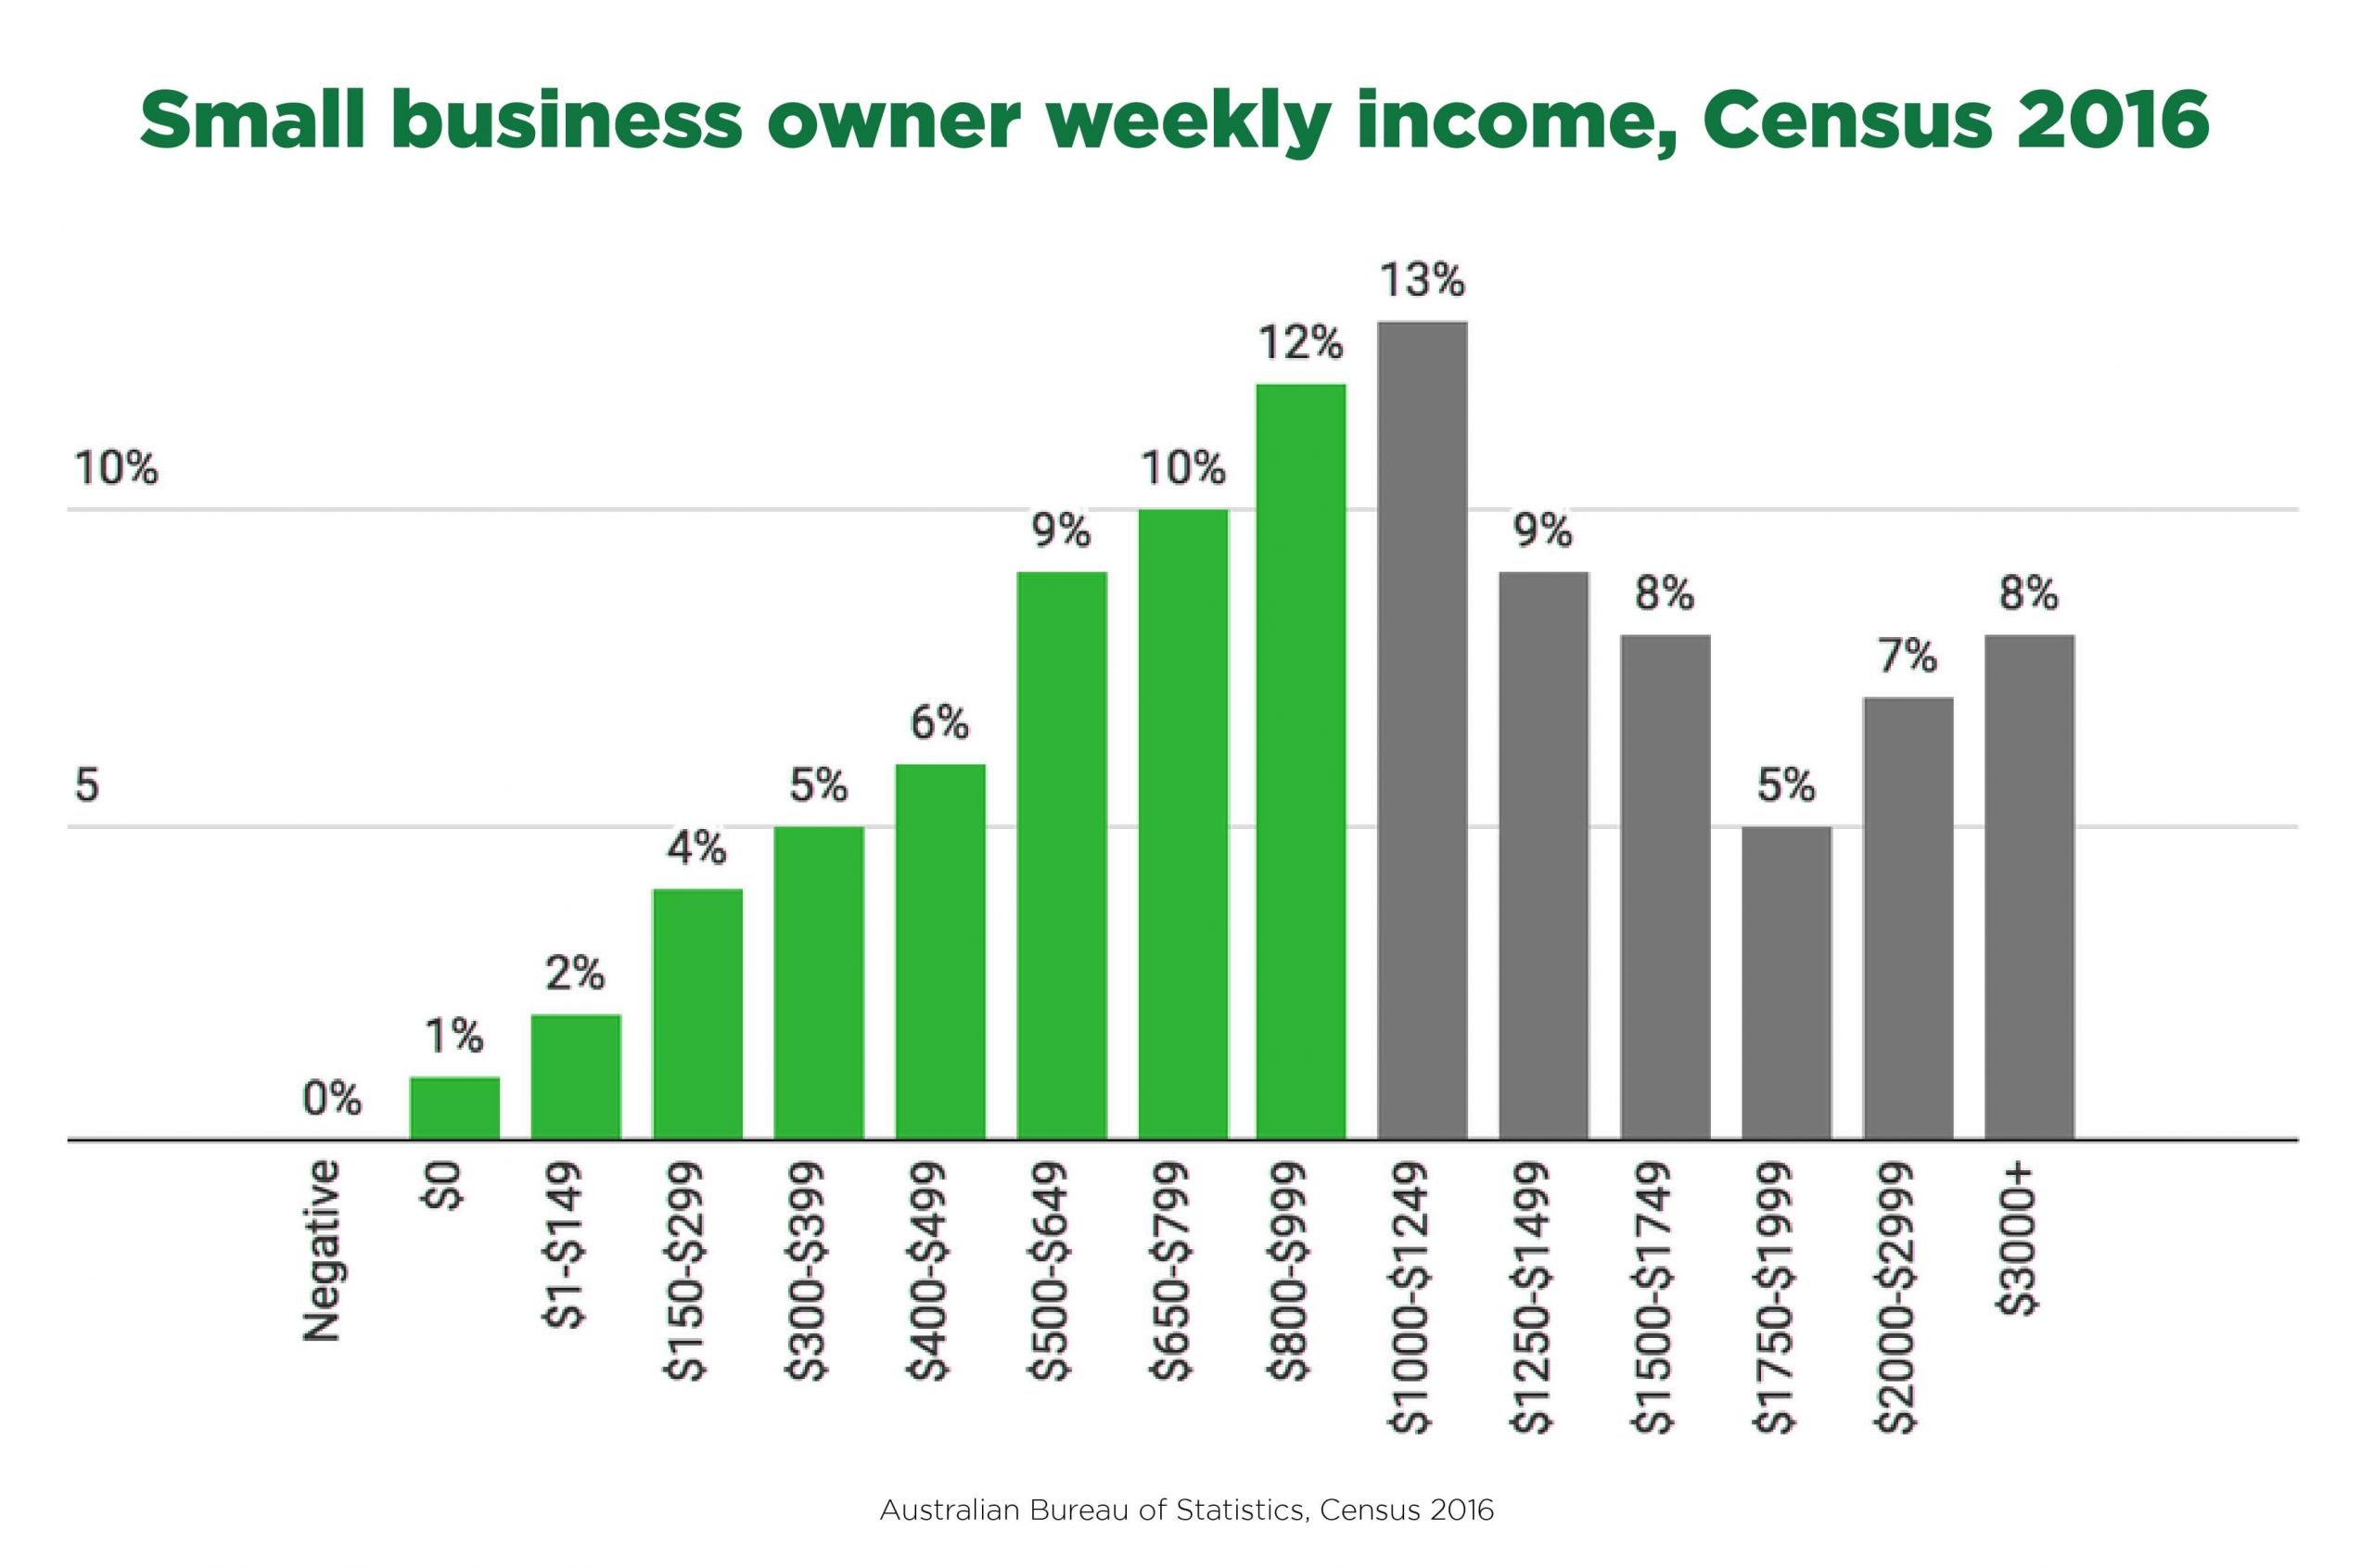 Small business owner weekly income, census 2016 - i4T Global